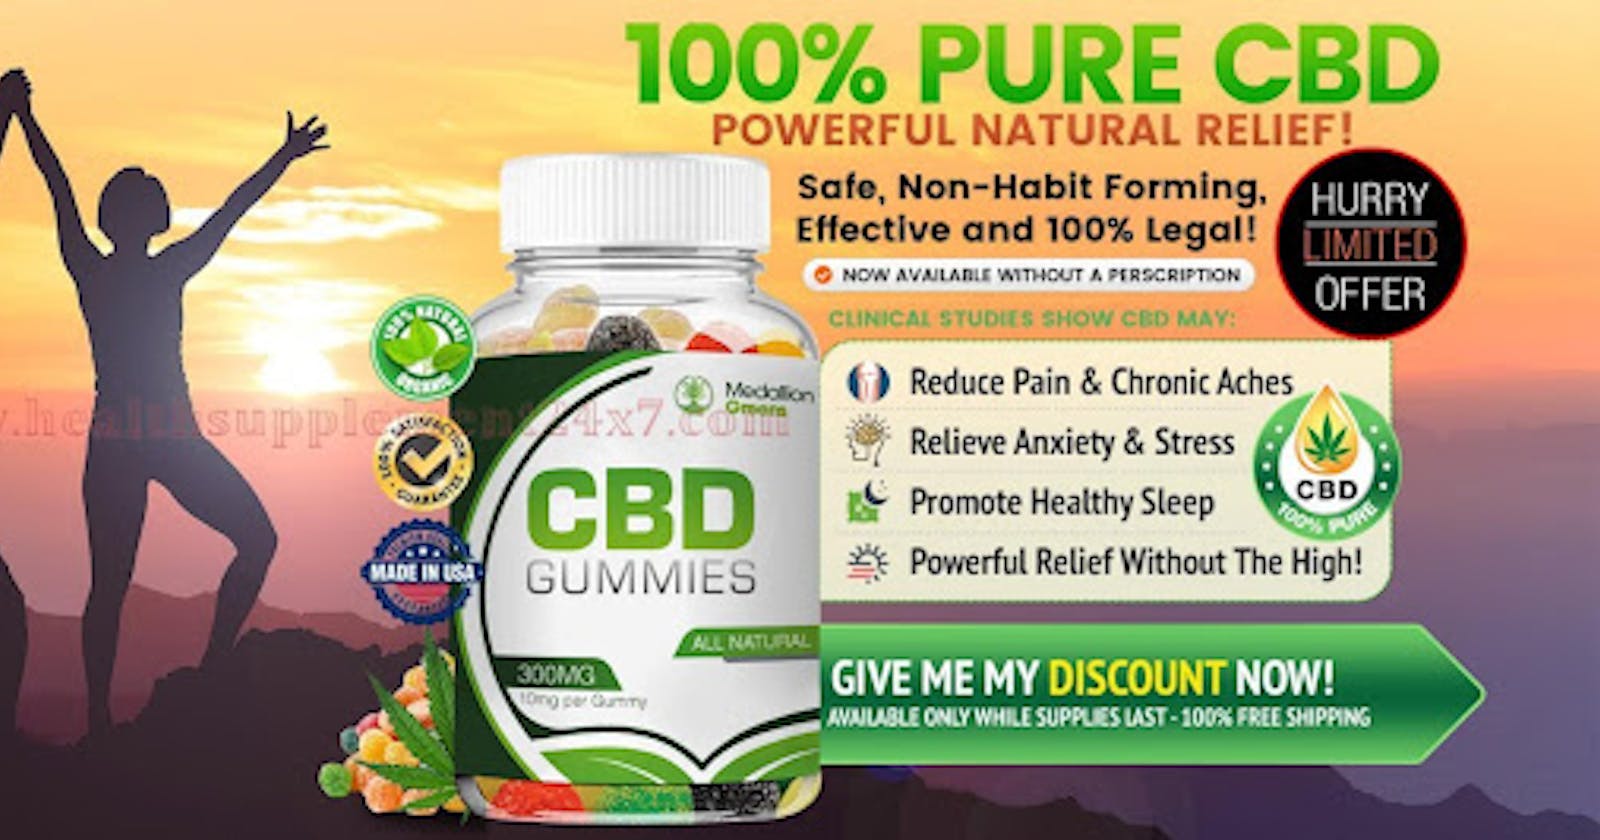 Medallion Greens CBD Gummies - This is Best CBD Gummies For Men? Must Read How Long Does THC From CBD Gummies Stay In Your System?